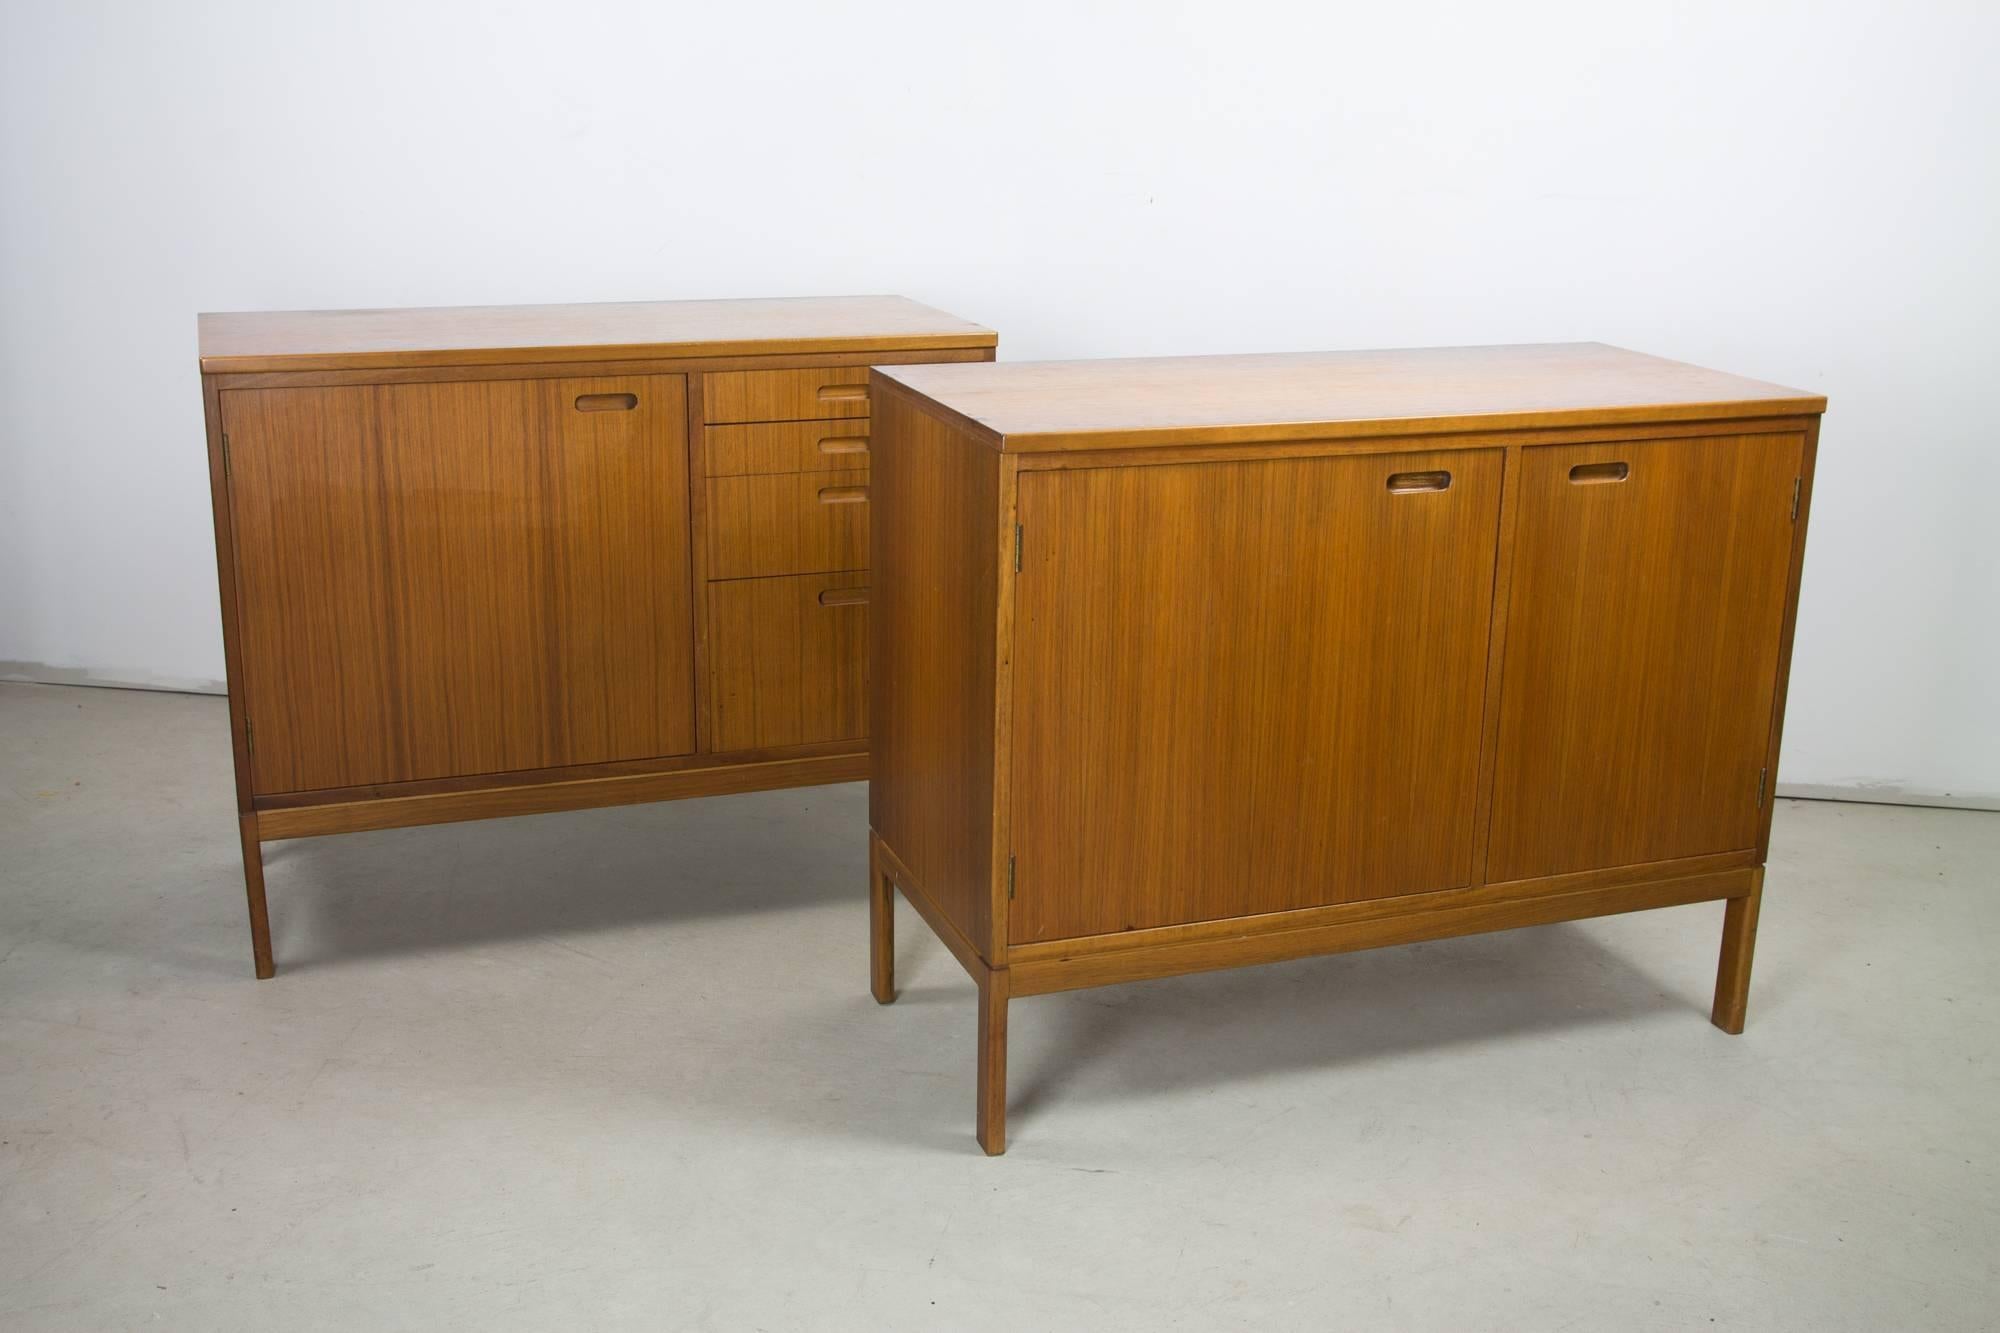 Two cabinets attributed to Directional, with inner shelving and various sized drawers, and a desk piece with two drawers, which suspends between the cabinets via small brass brackets. The desk piece can be easily detached for alternate arrangement